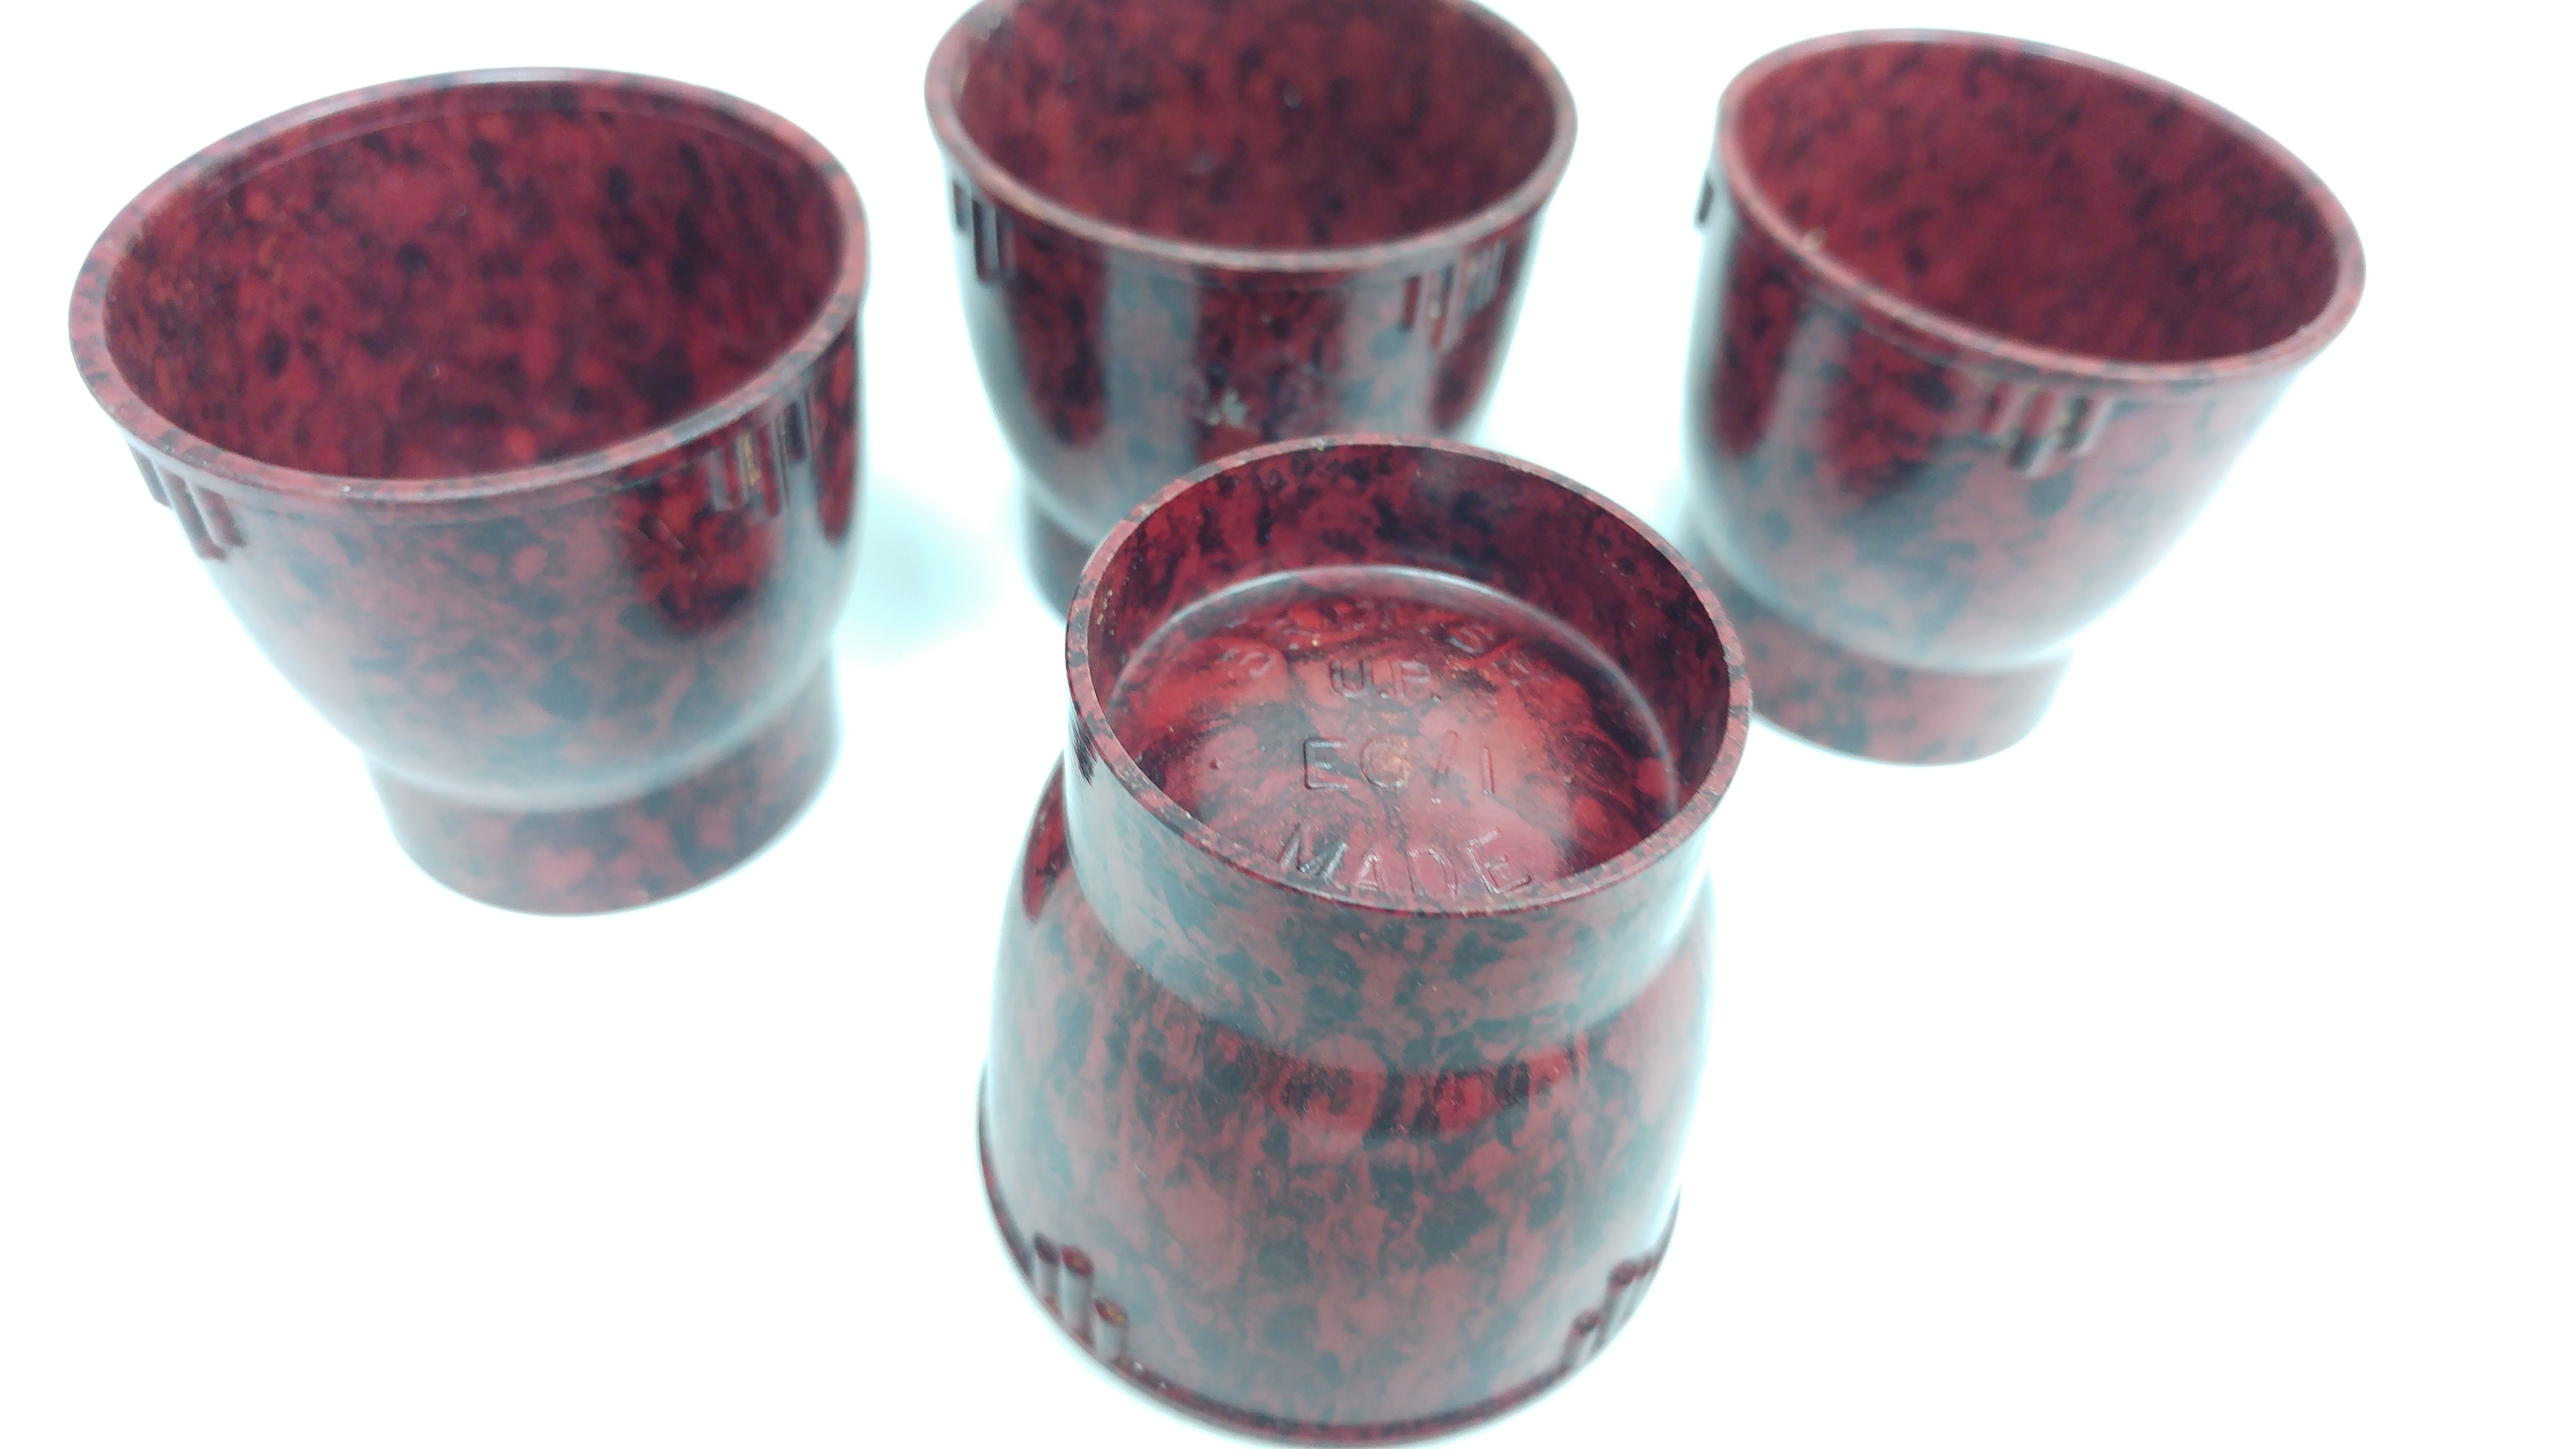 Phenol formaldehdye plastic egg cups with design information moulded into the base (c) Anita Quye (1)